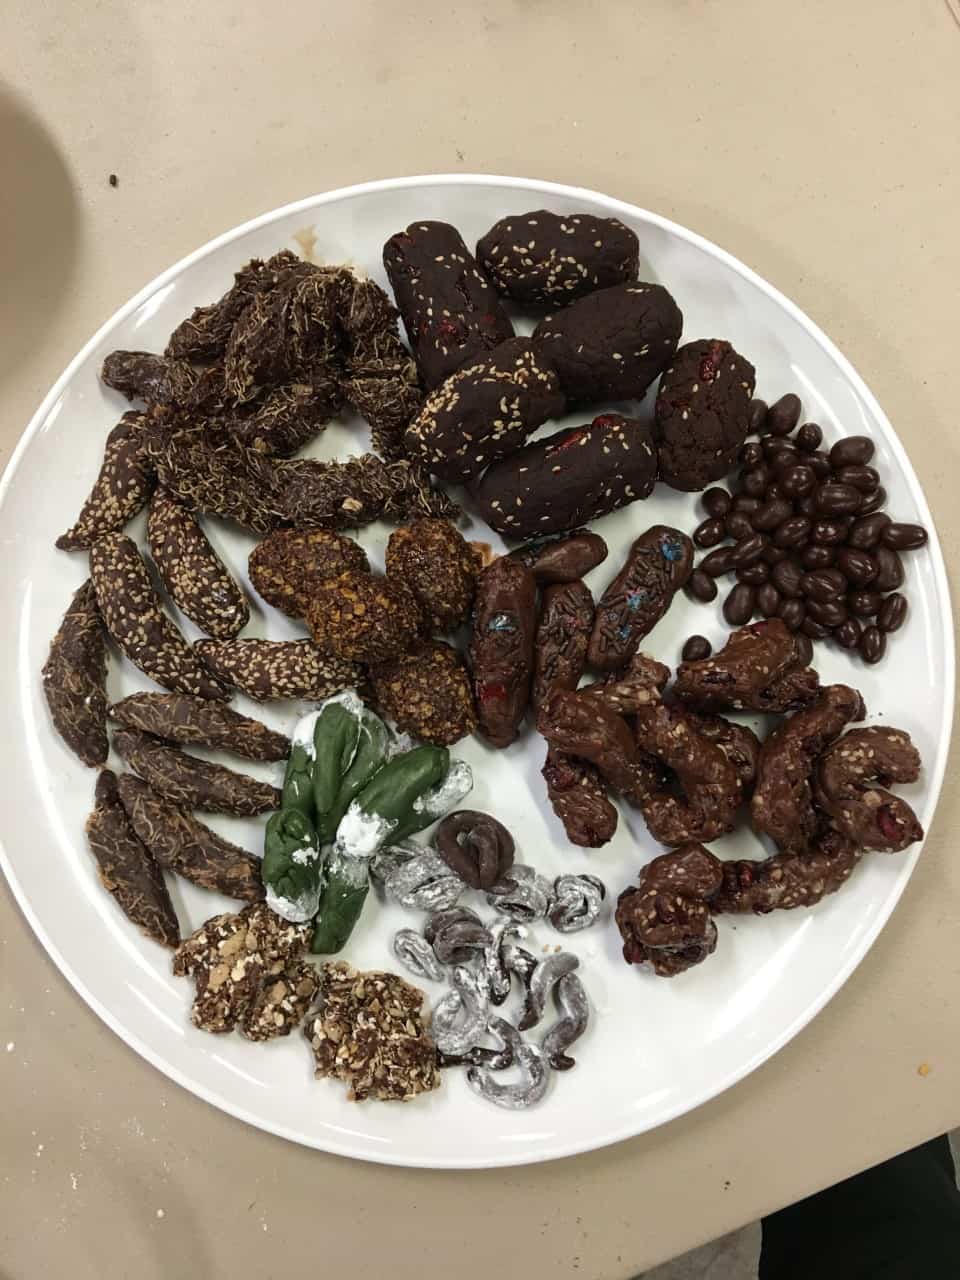 Replica animal scat made from chocolate and other ingredients